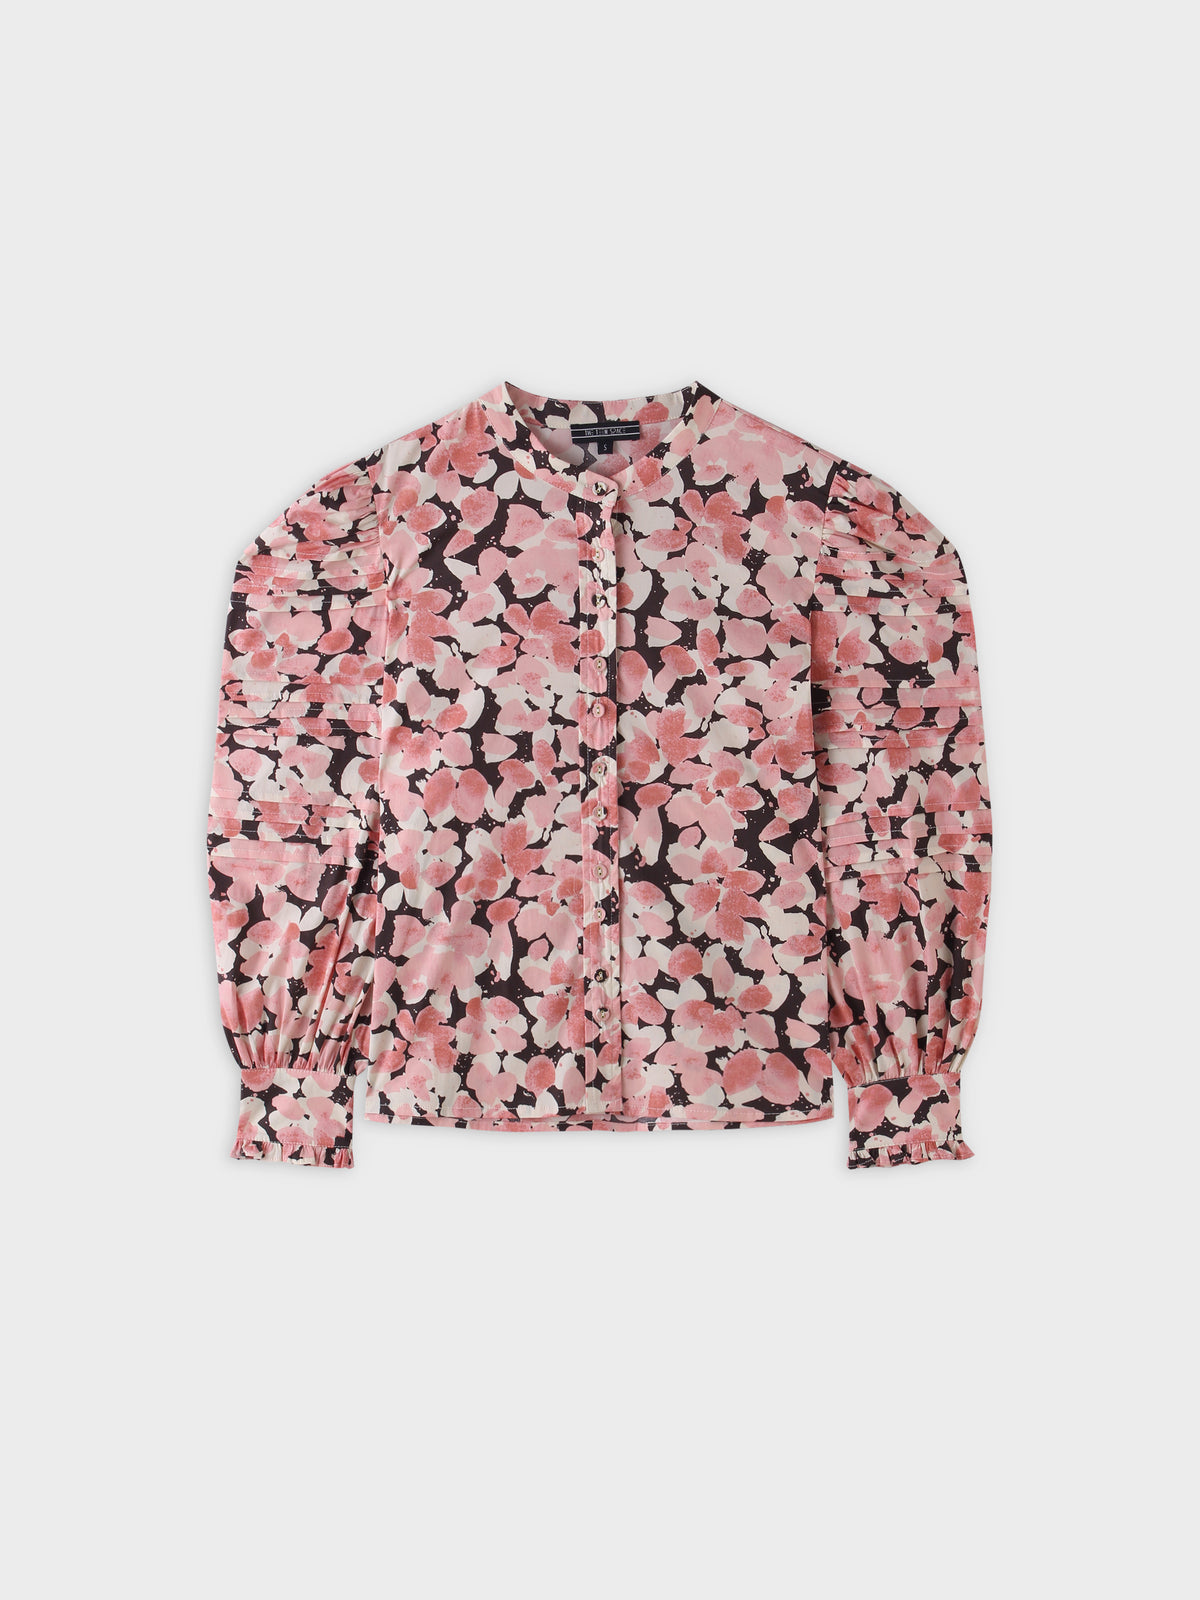 Pleated Sleeve Blouse-Pink/Black Floral